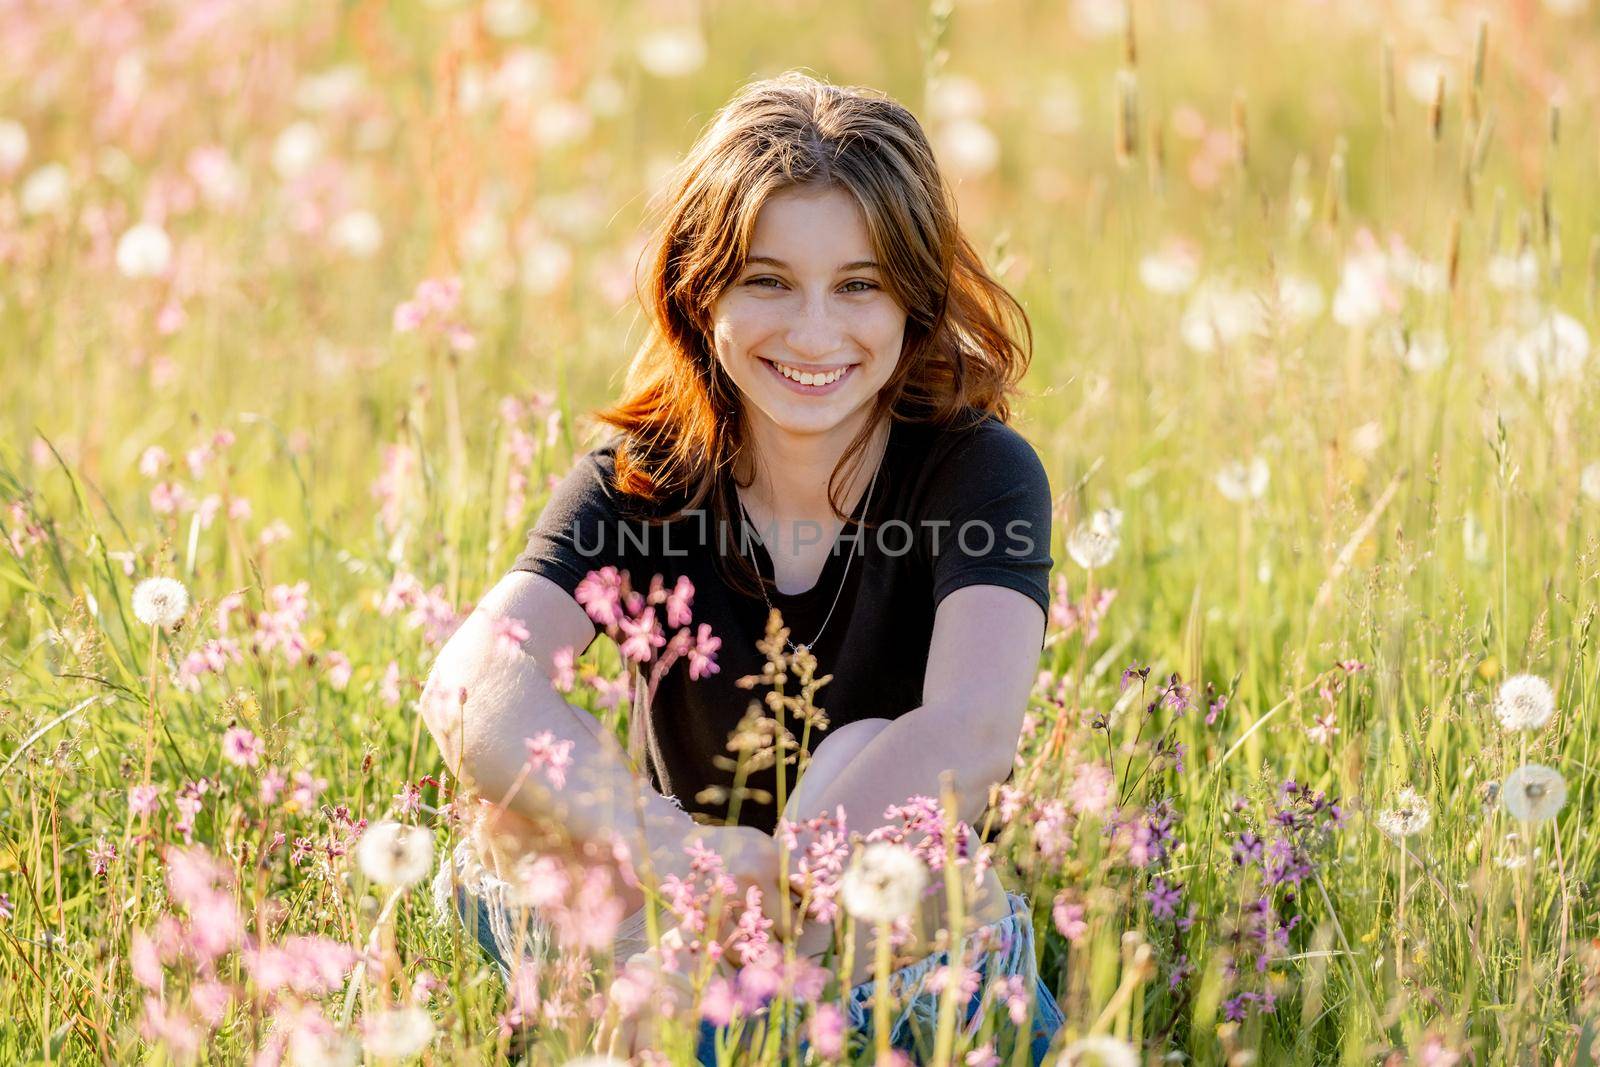 Pretty girl teenager sitting in field with dandelions and flowers, looking at camera and smiling outdoors. Beautiful young female person at nature in sunny day portrait